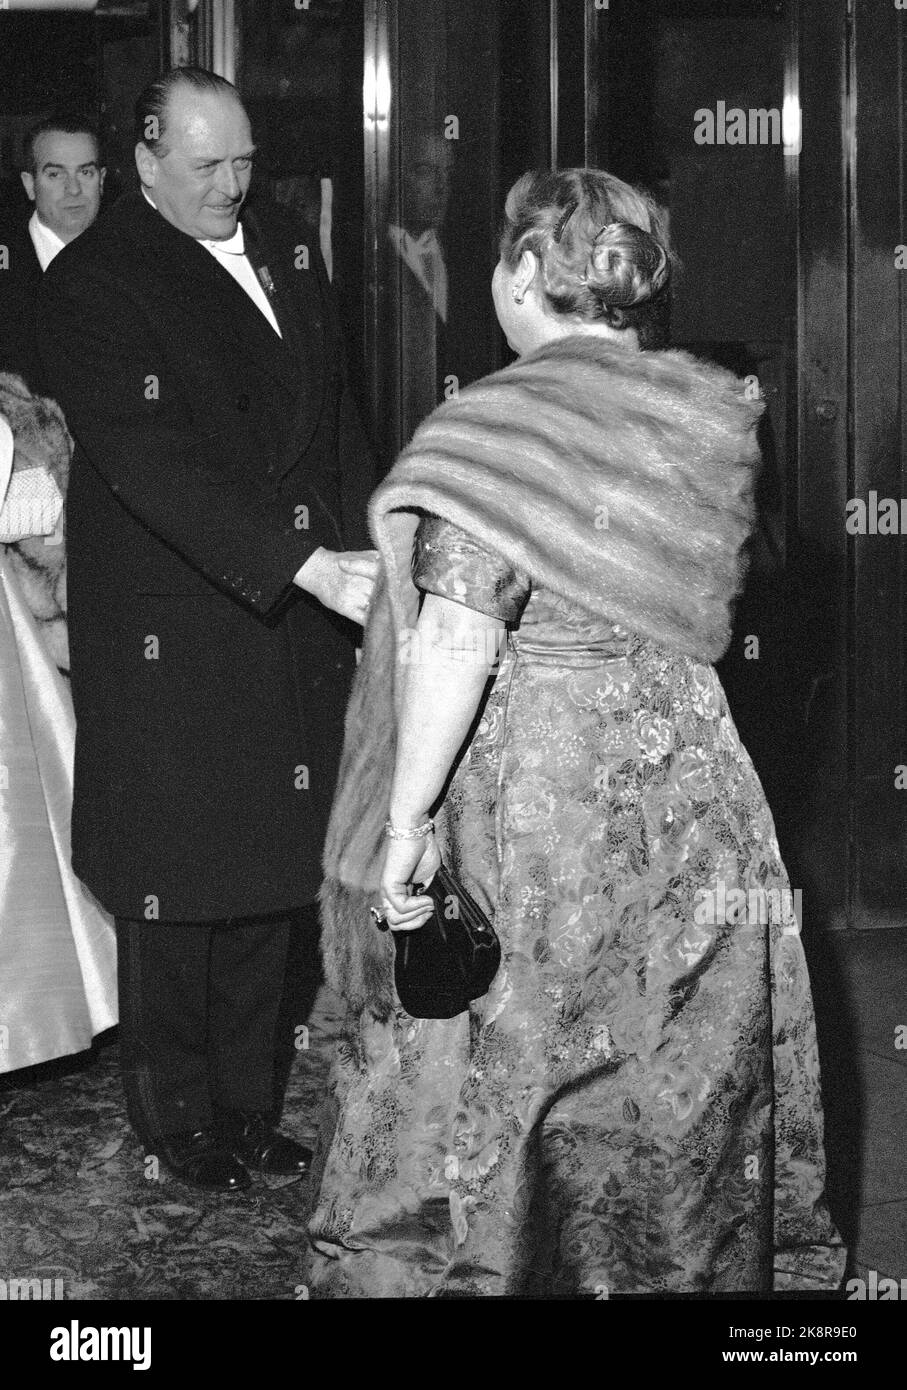 Oslo 19590216: The opening of the Norwegian Opera. King Olav is welcomed to the opening of operations manager Kirsten Flagstad. Photo: Børretzen / Current / NTB Stock Photo